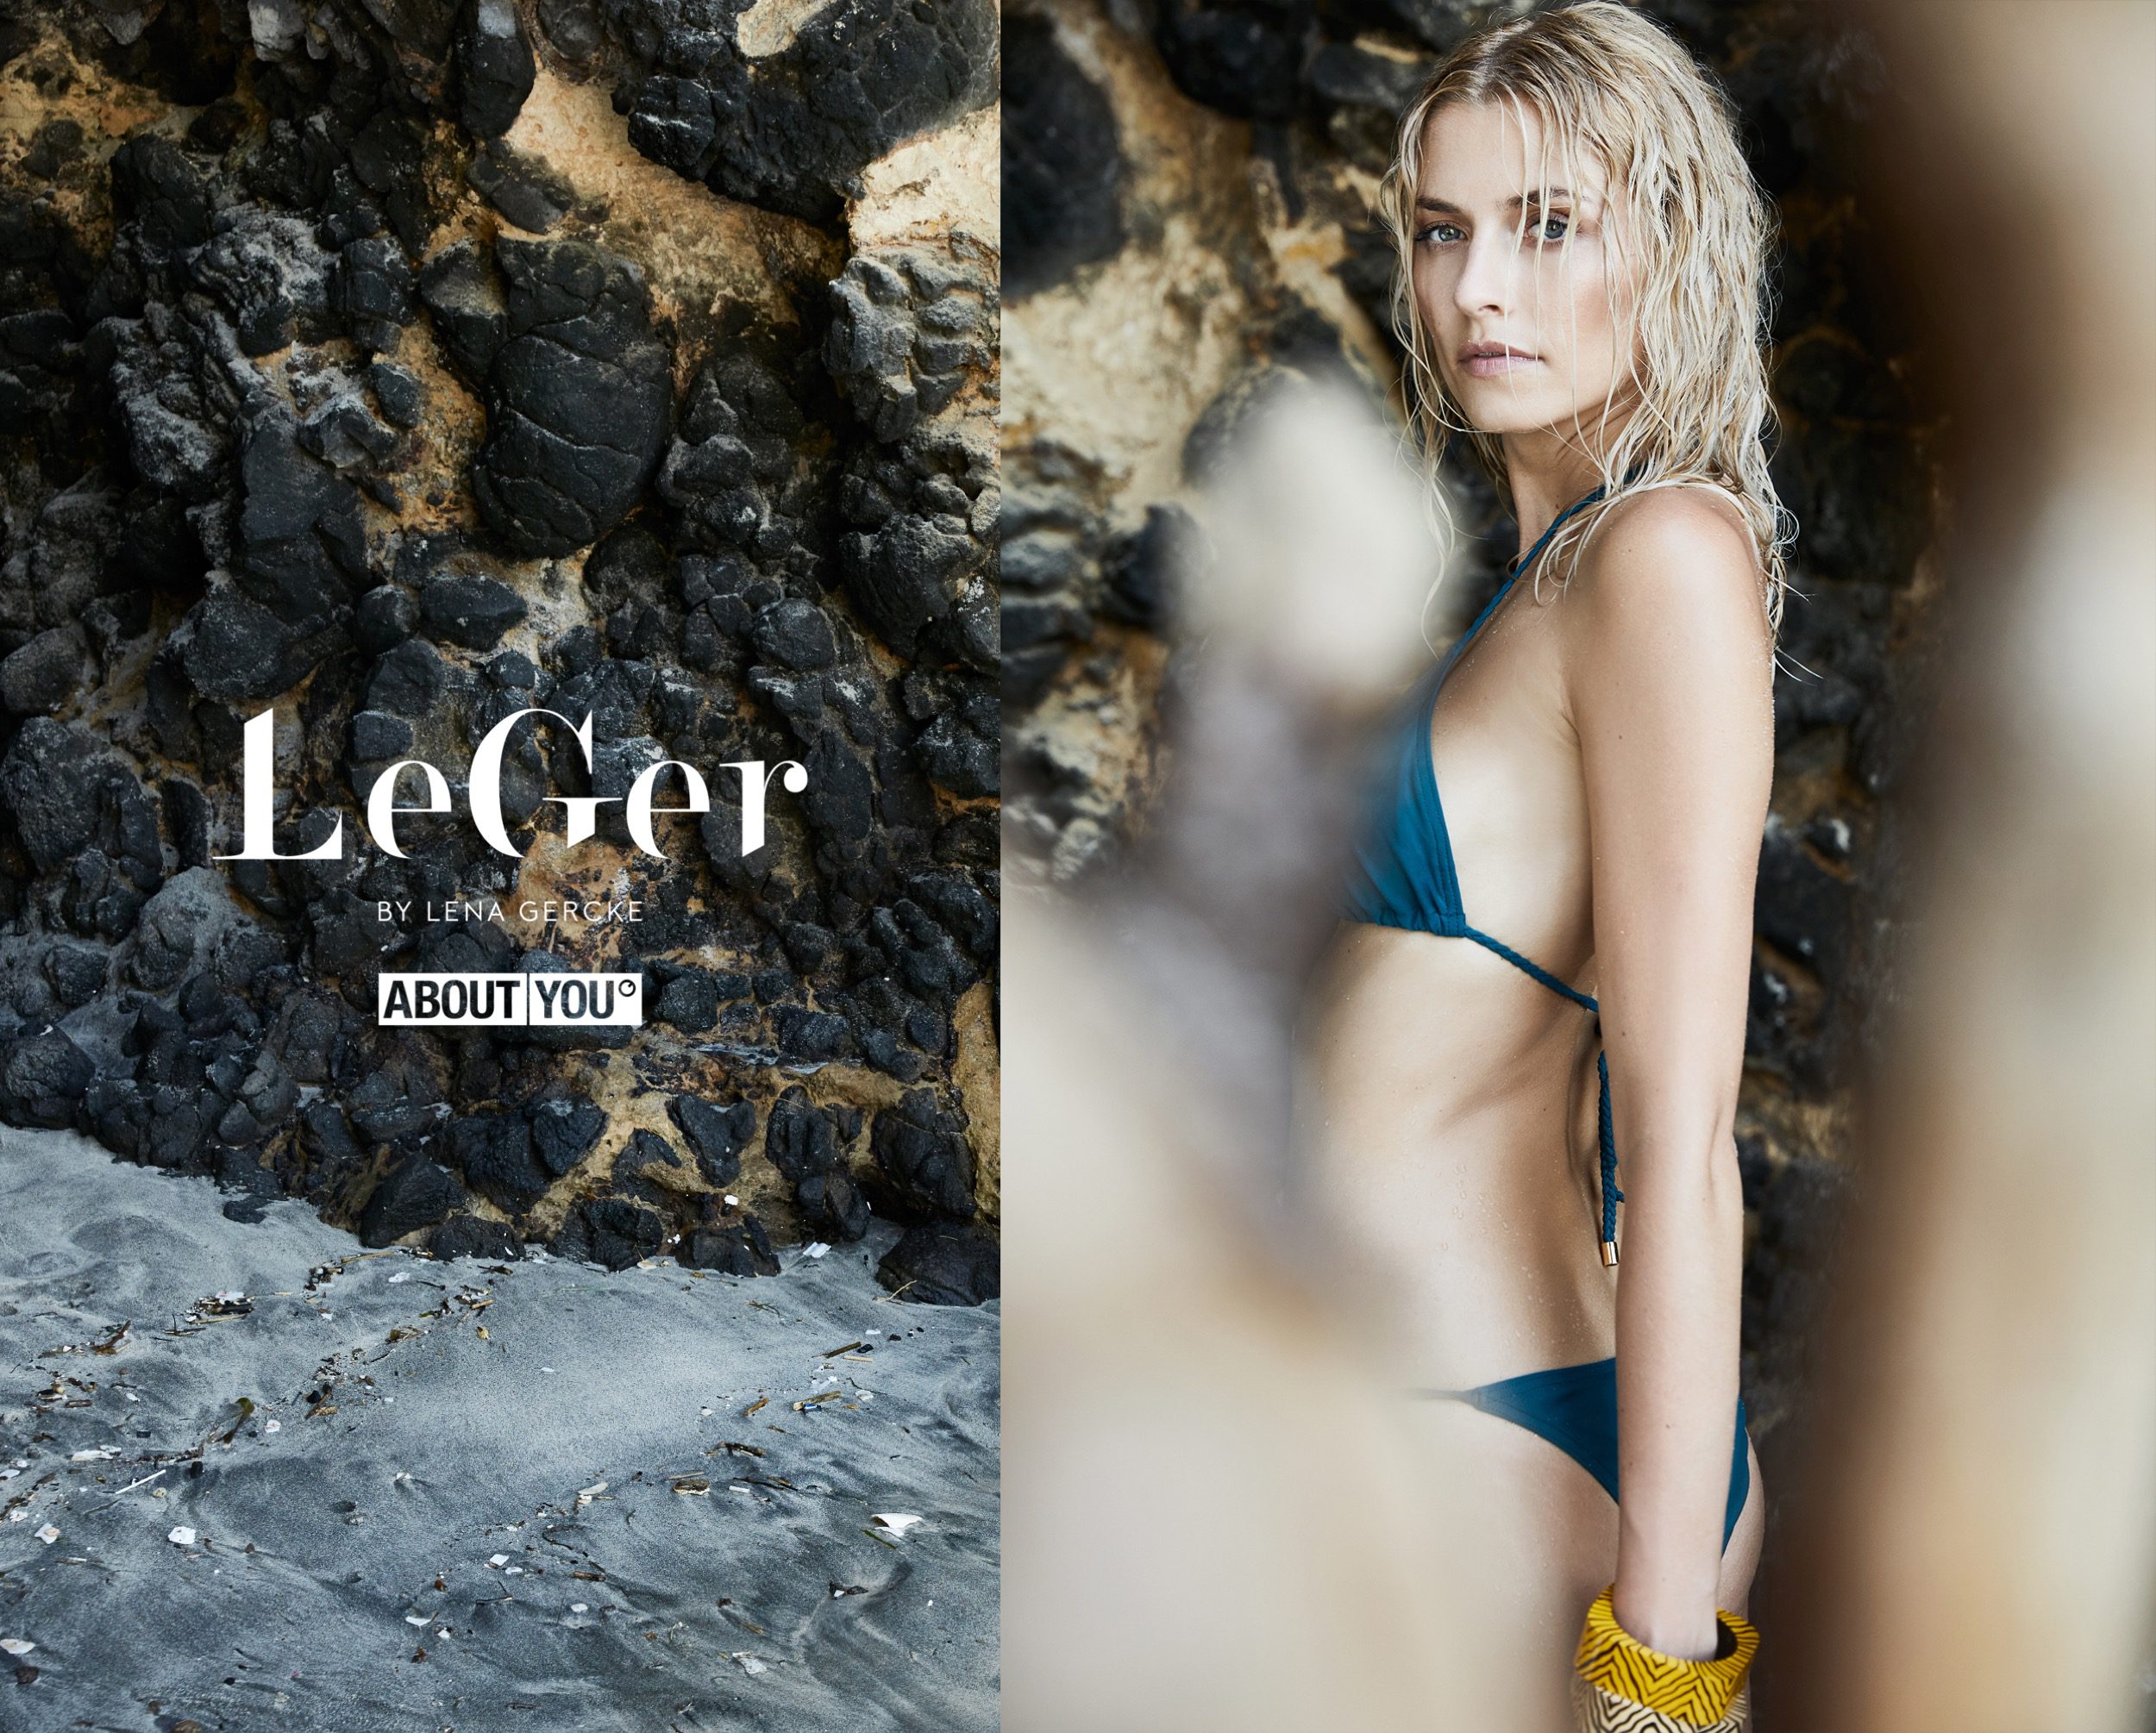 kathrin-hohberg-about-you-leger-bali-sina-oestlund-02